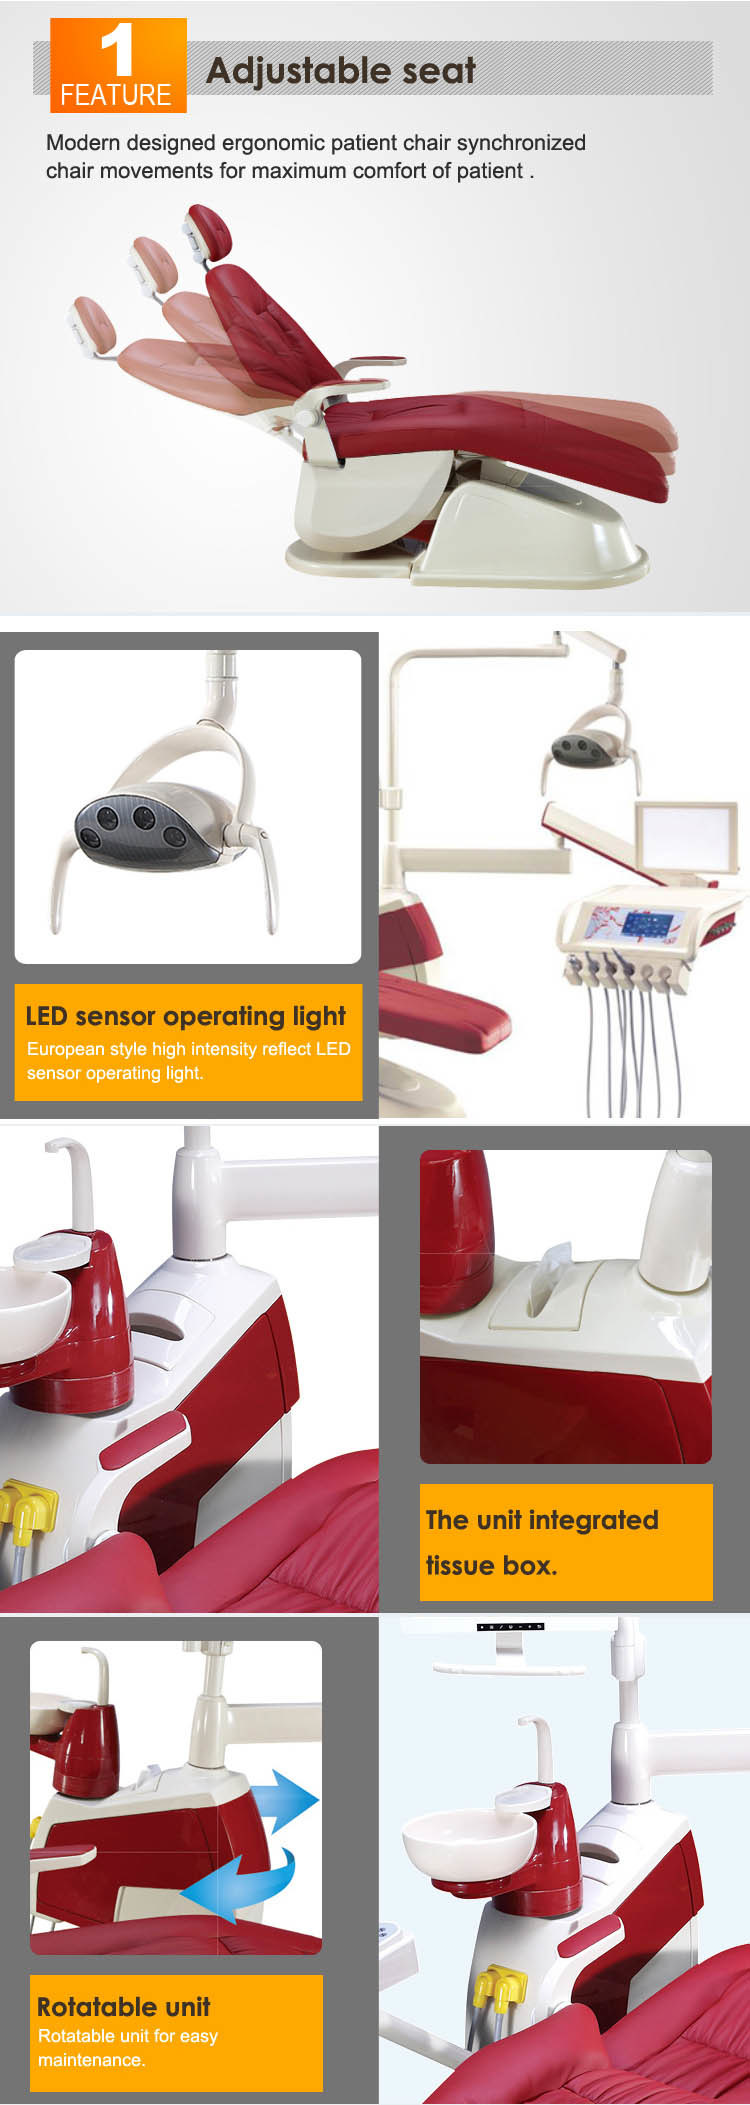 Best Electric ISO Approved Dental Chair Dental Delivery Systems Inc/	Dental Stools UK/Best Dental Products